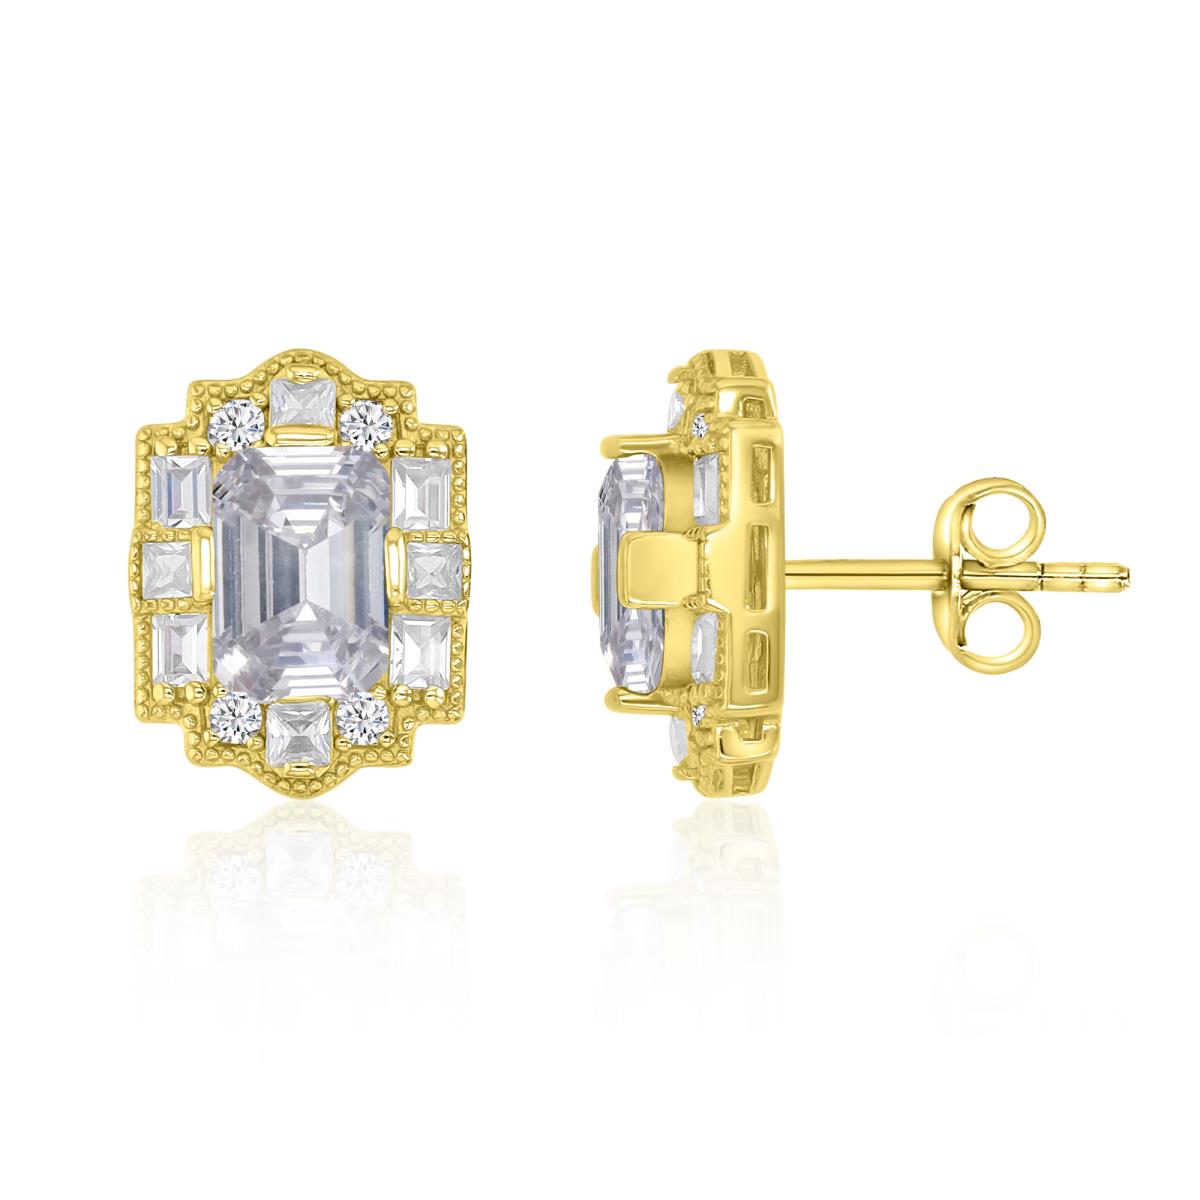 Sterling Silver Yellow 1M 15X11.5MM Polished White CZ Vintage Emerald Cut Stud Earrings